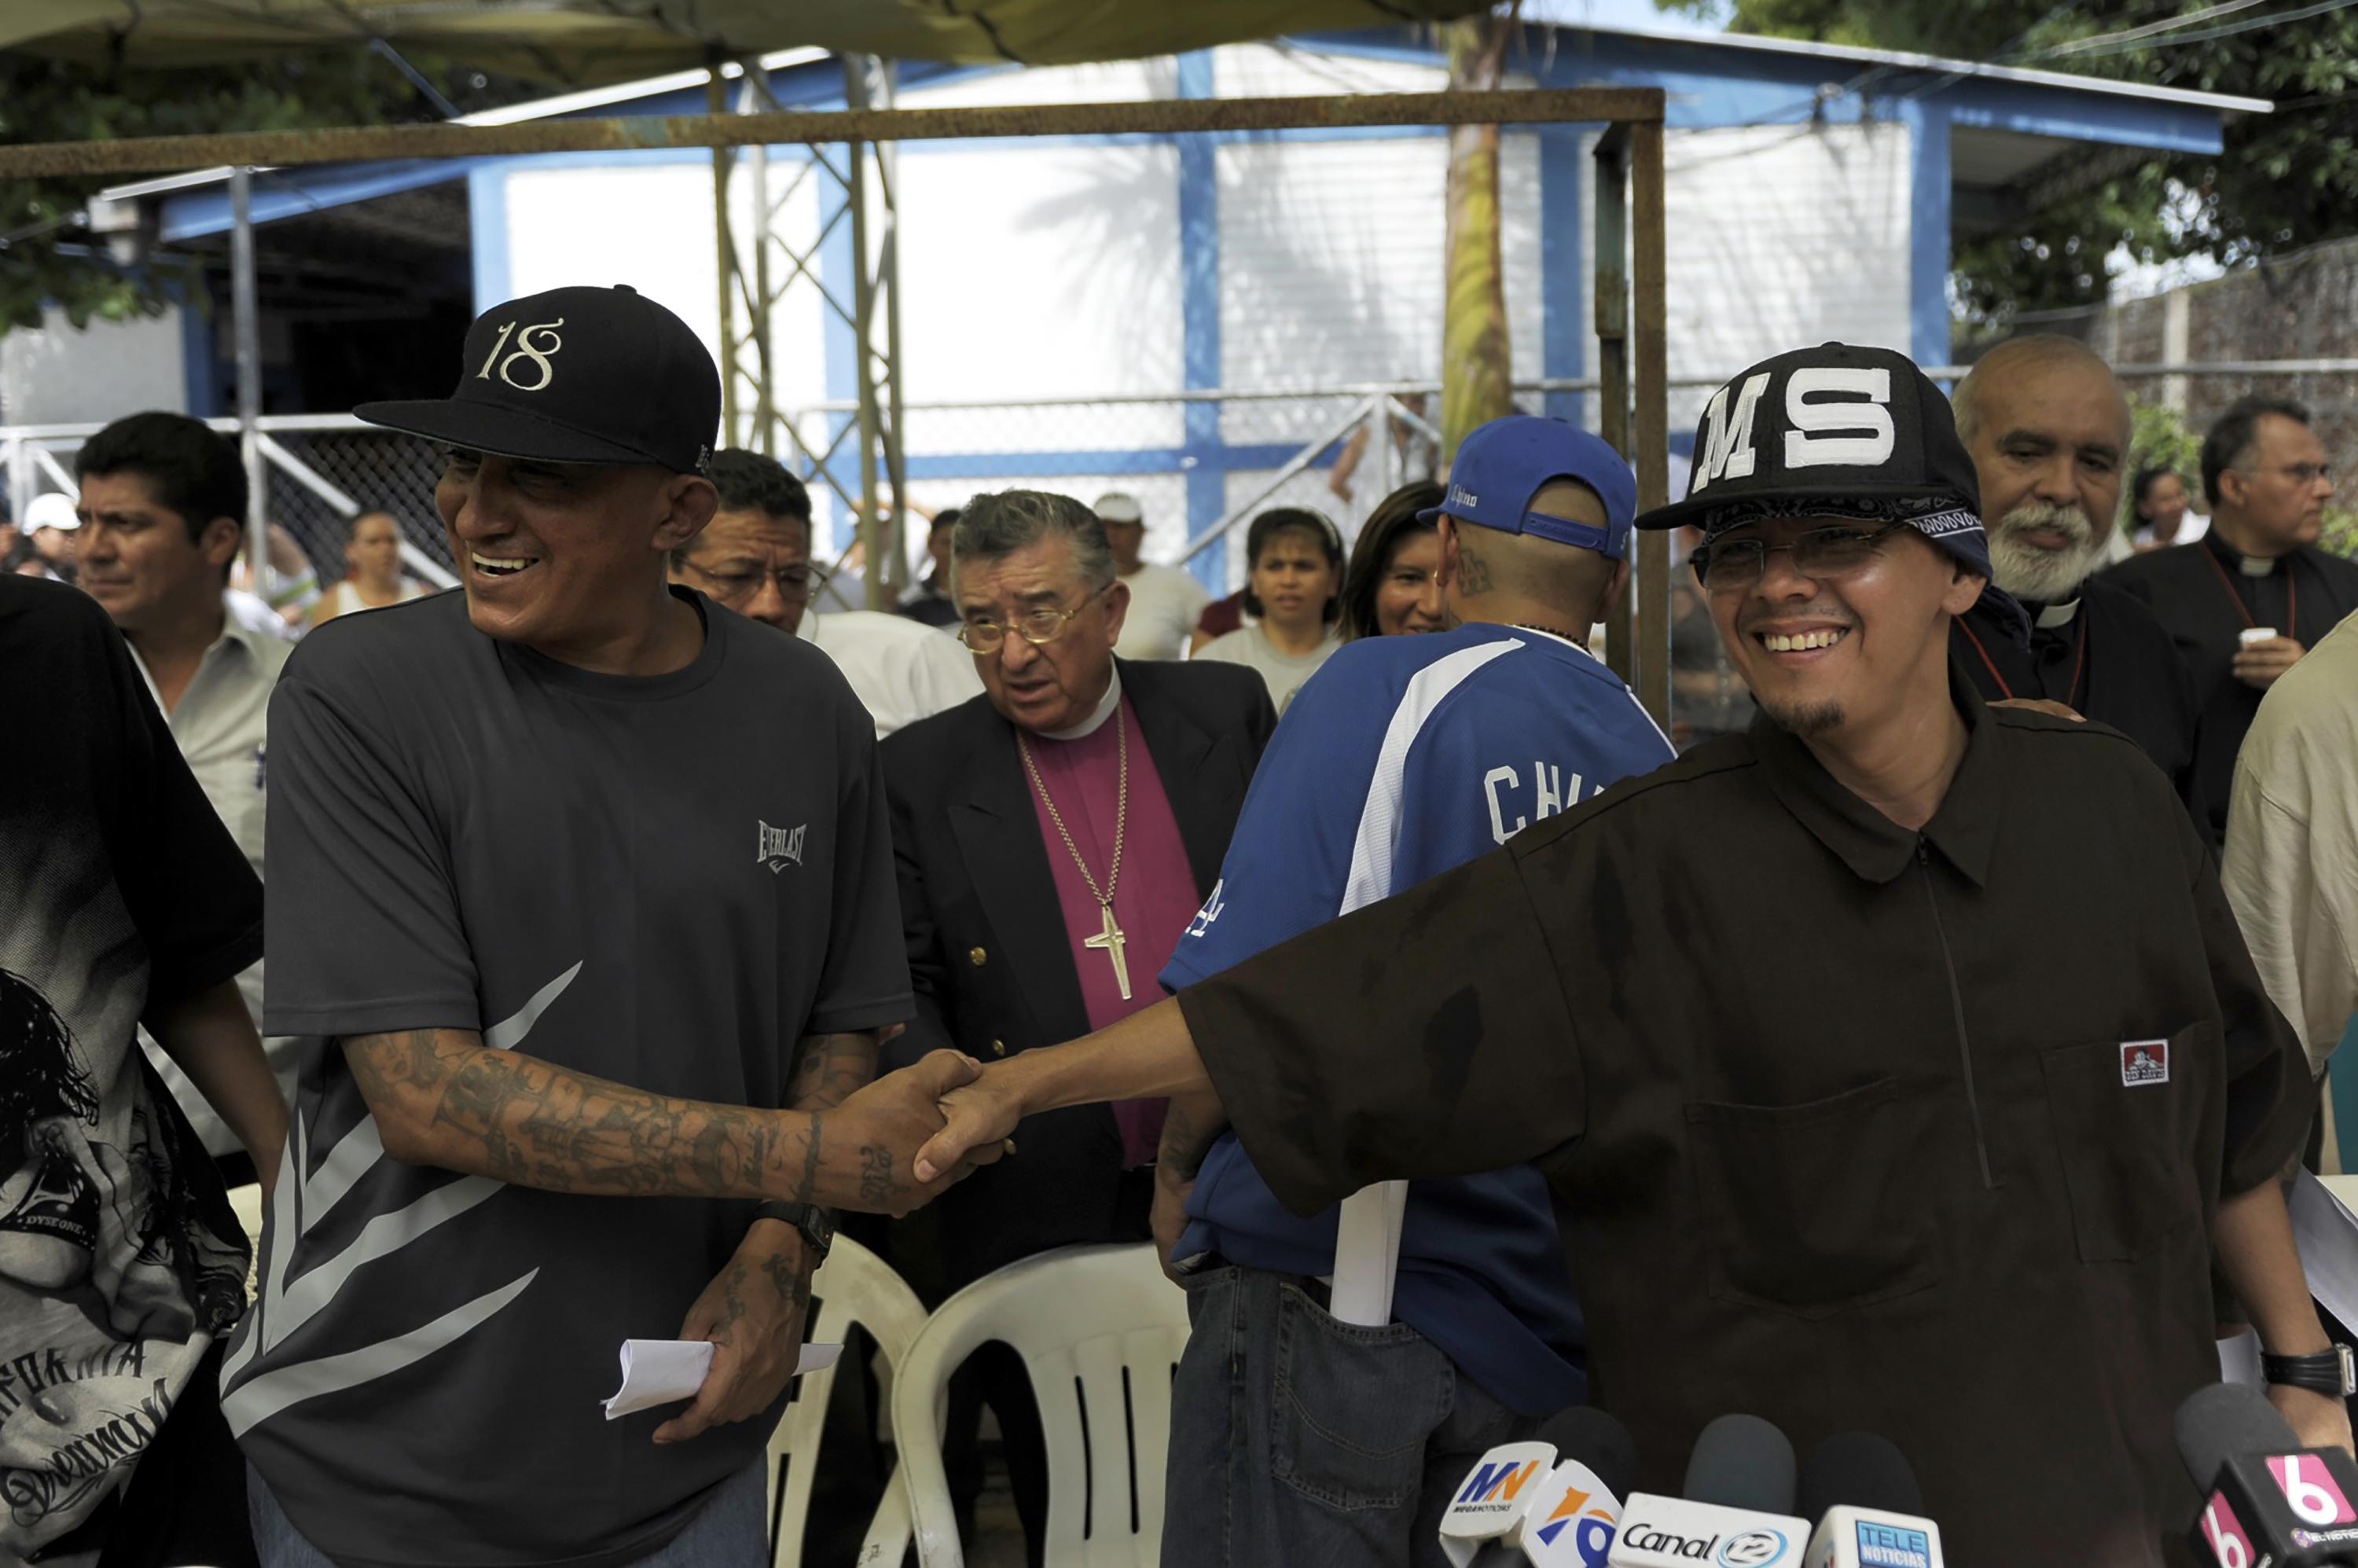 Carlos Mojica Lechuga, “Viejo Lyn”, and Edson Zachary Eufemia, representatives of 18th Street and MS-13, respectively, shake hands in September 2012 in an event during the Truce. Photo: José Cabezas/AFP